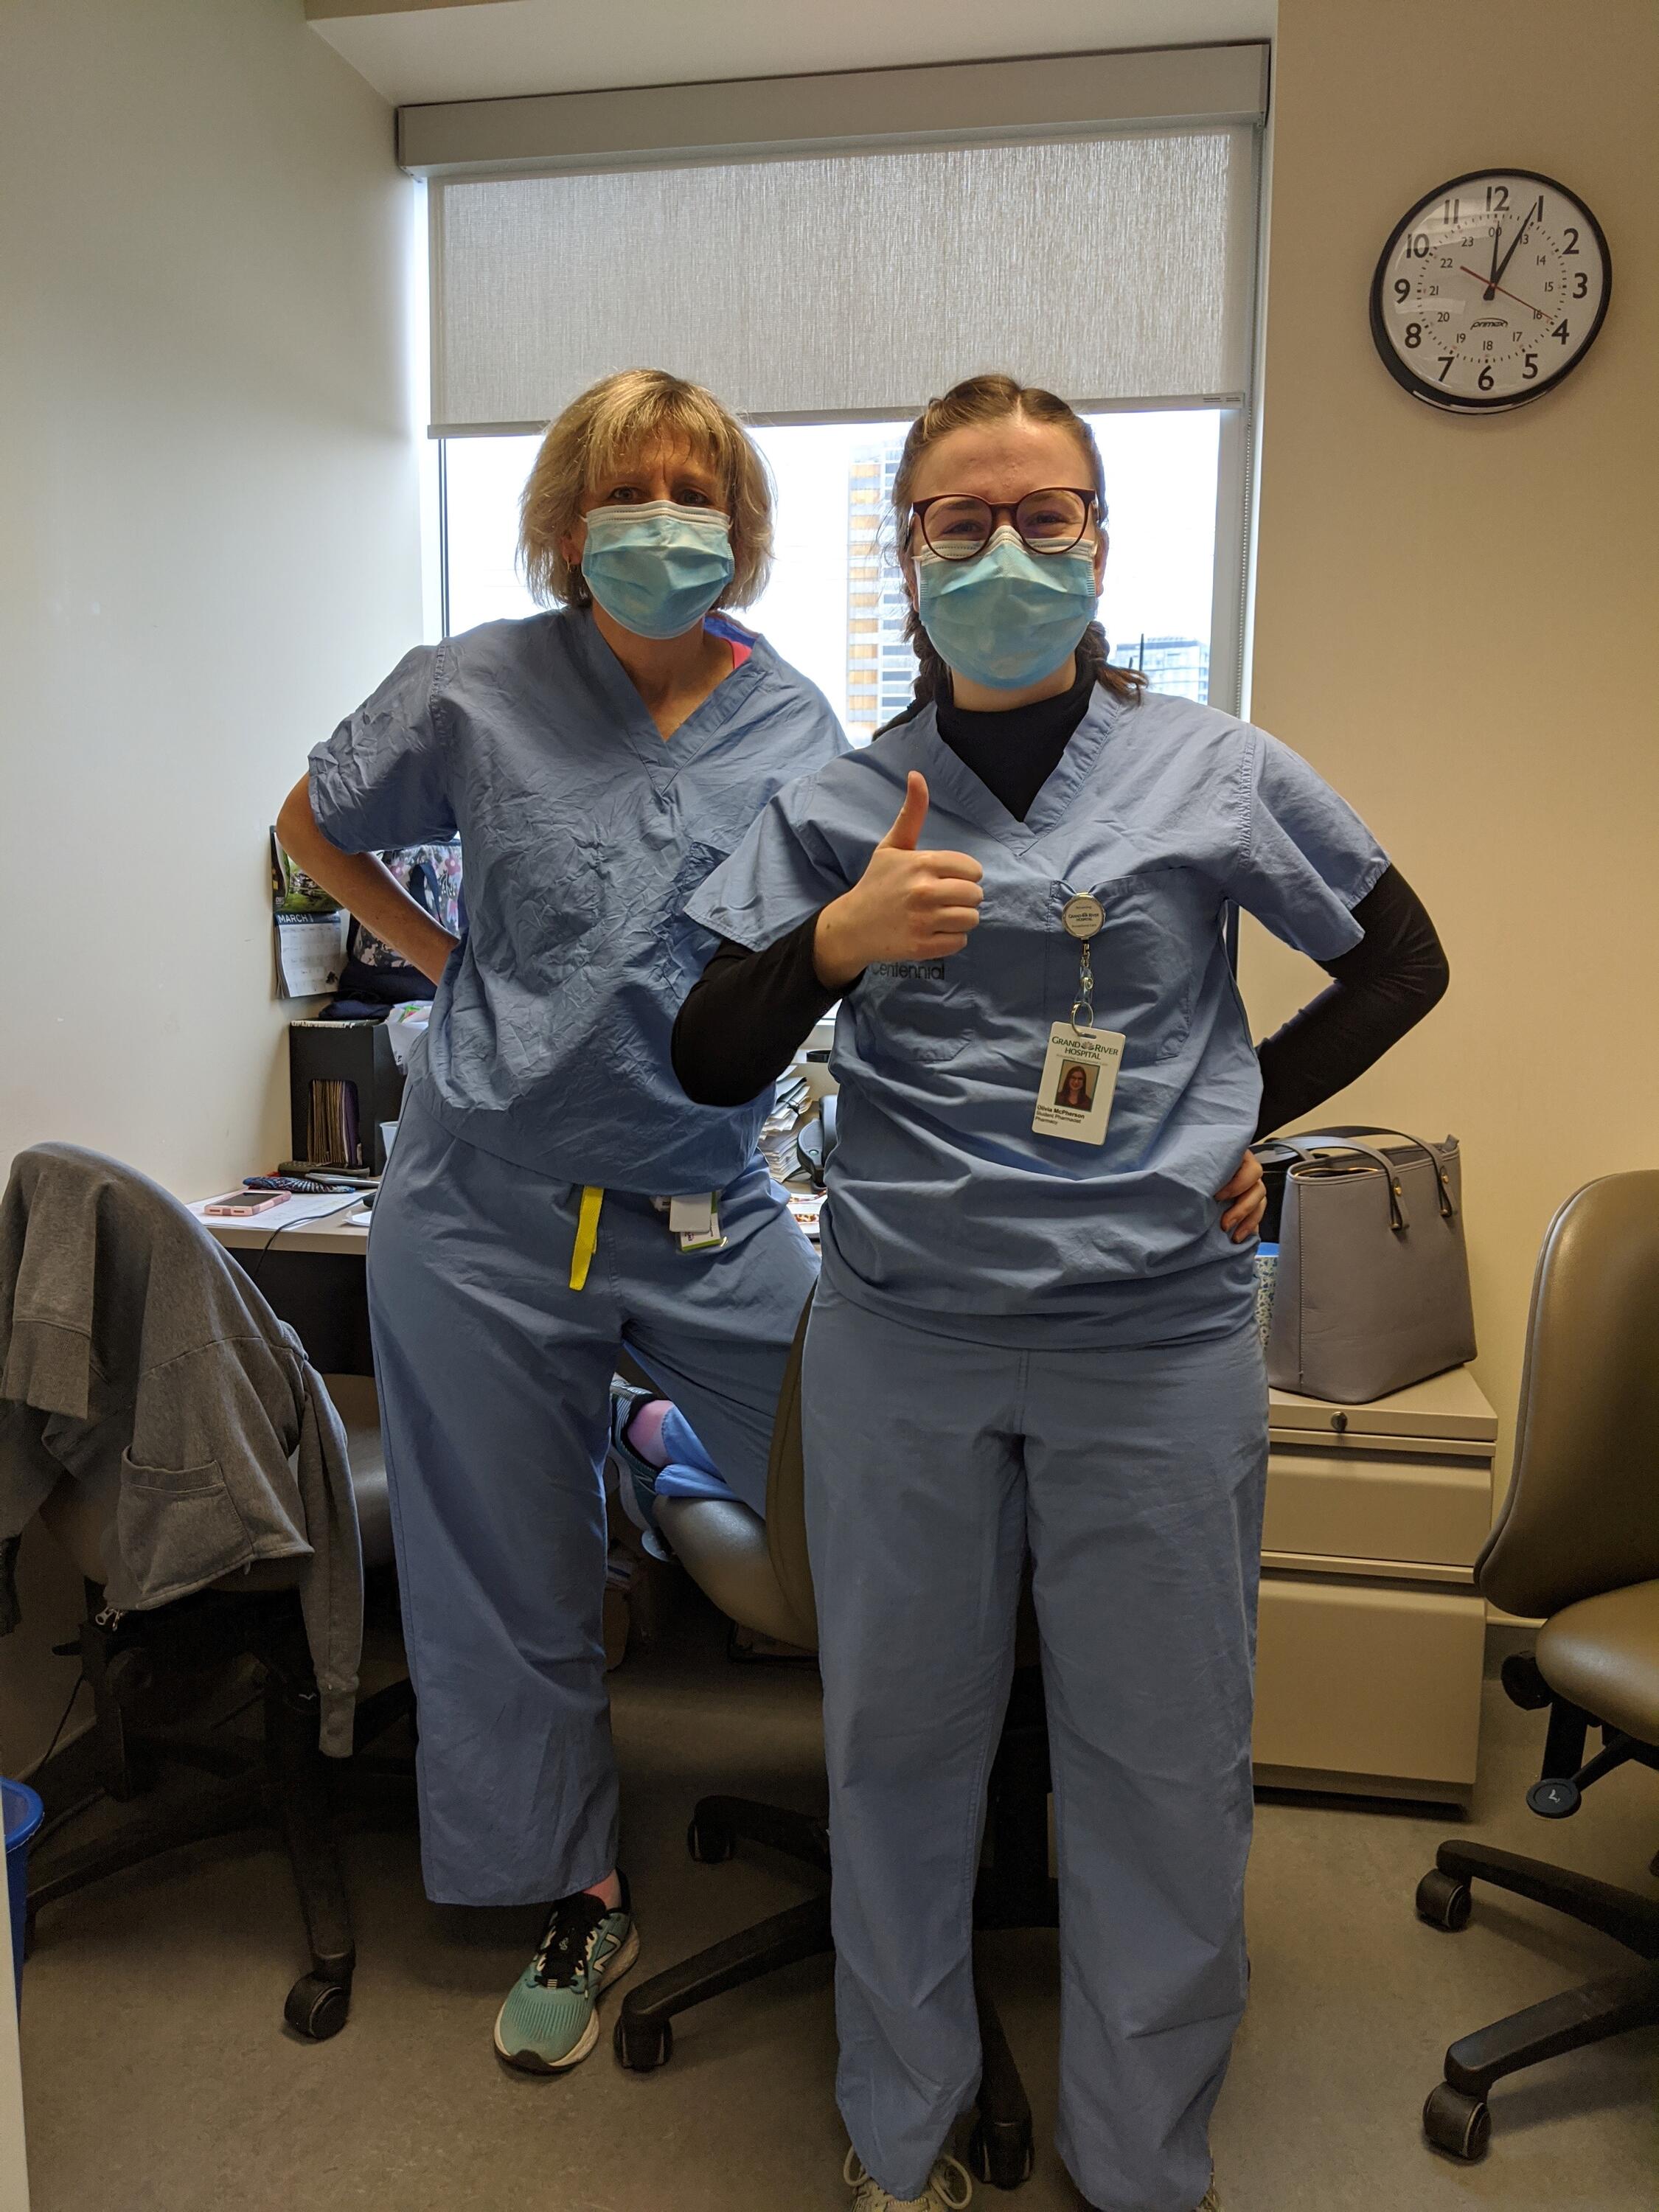 Olivia and supervisor wearing scrubs and face masks